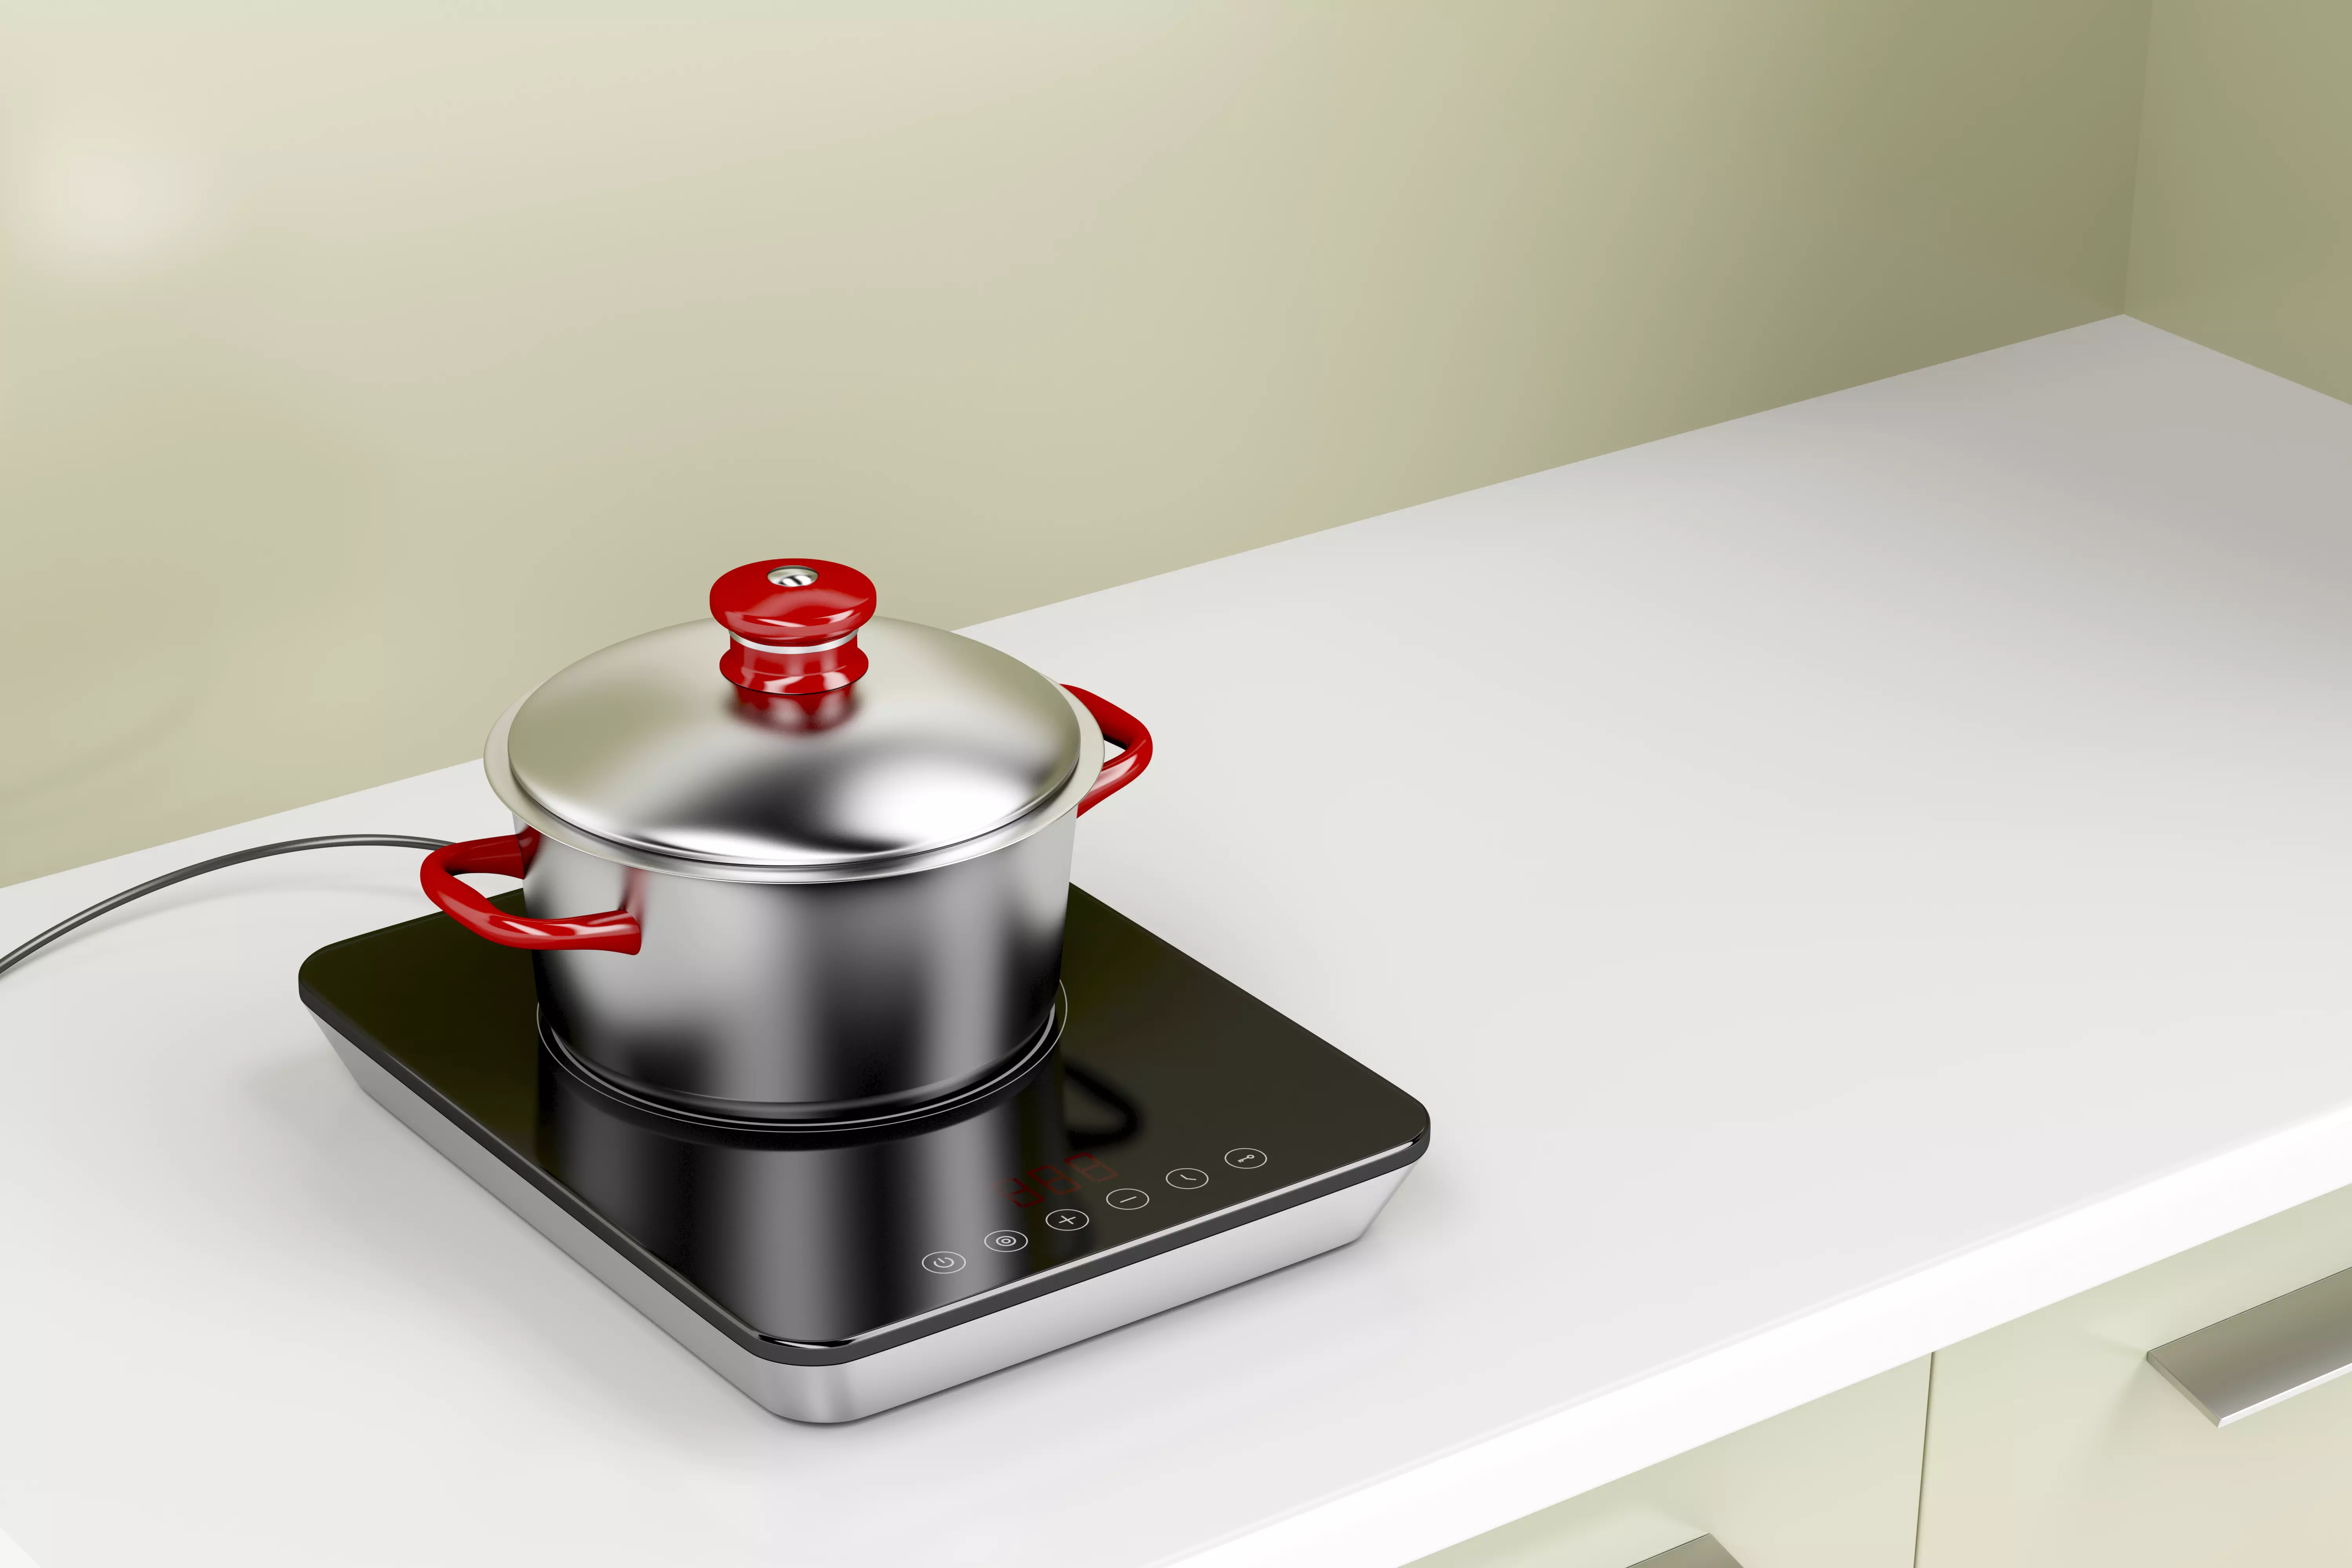 Portable induction cooker and pan